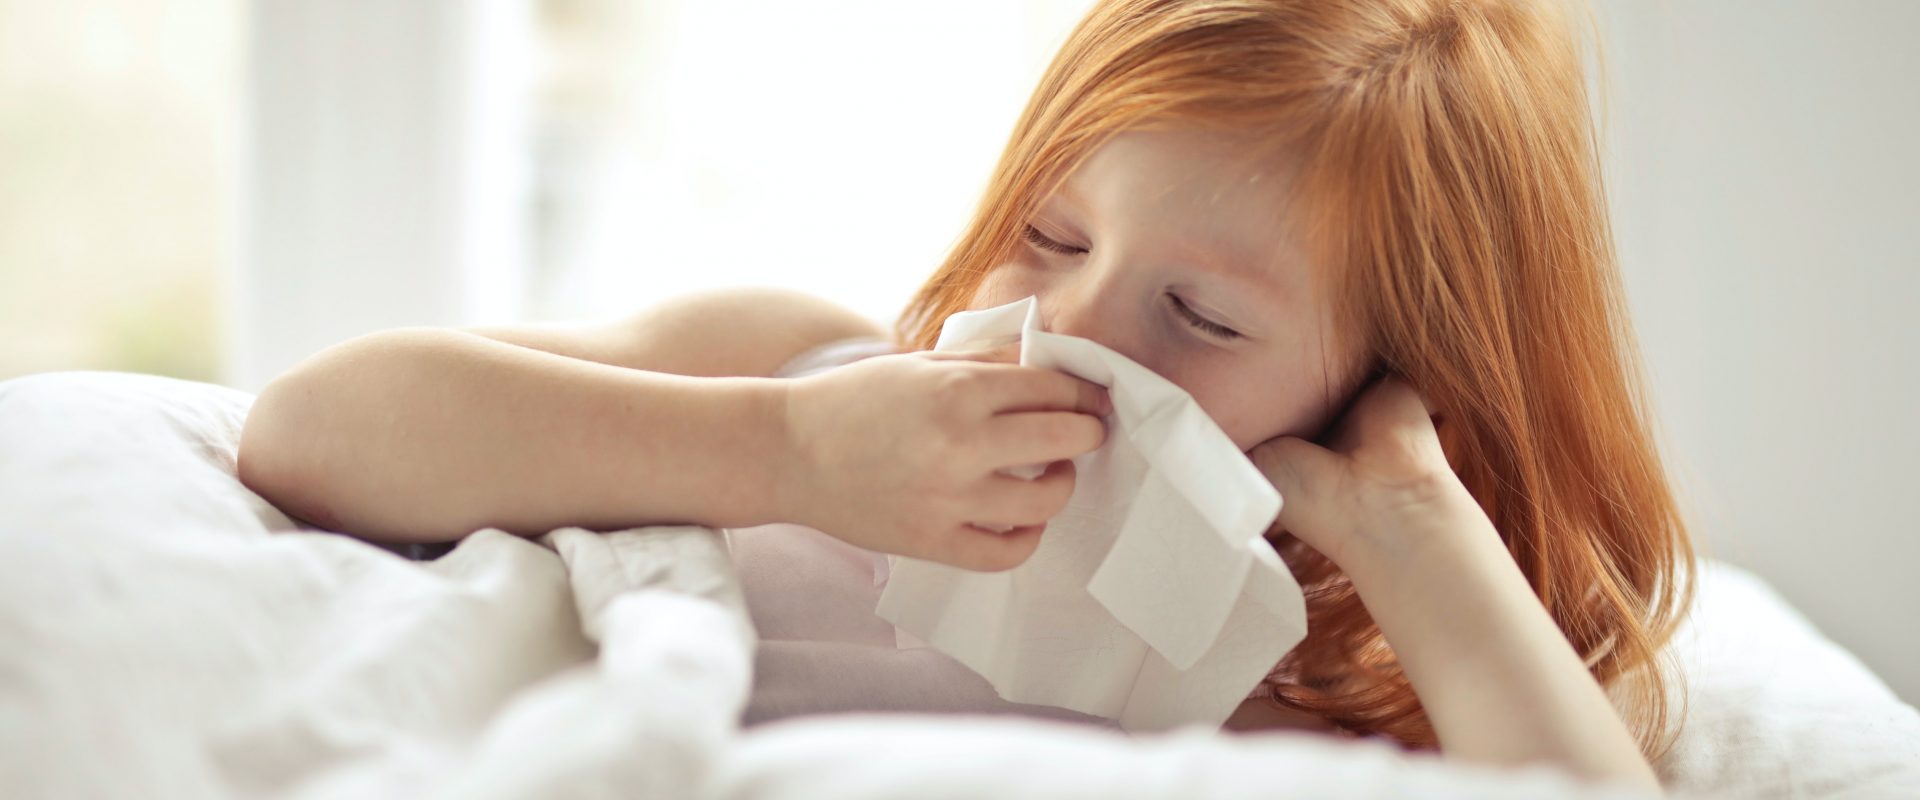 natural remedies for flus and colds